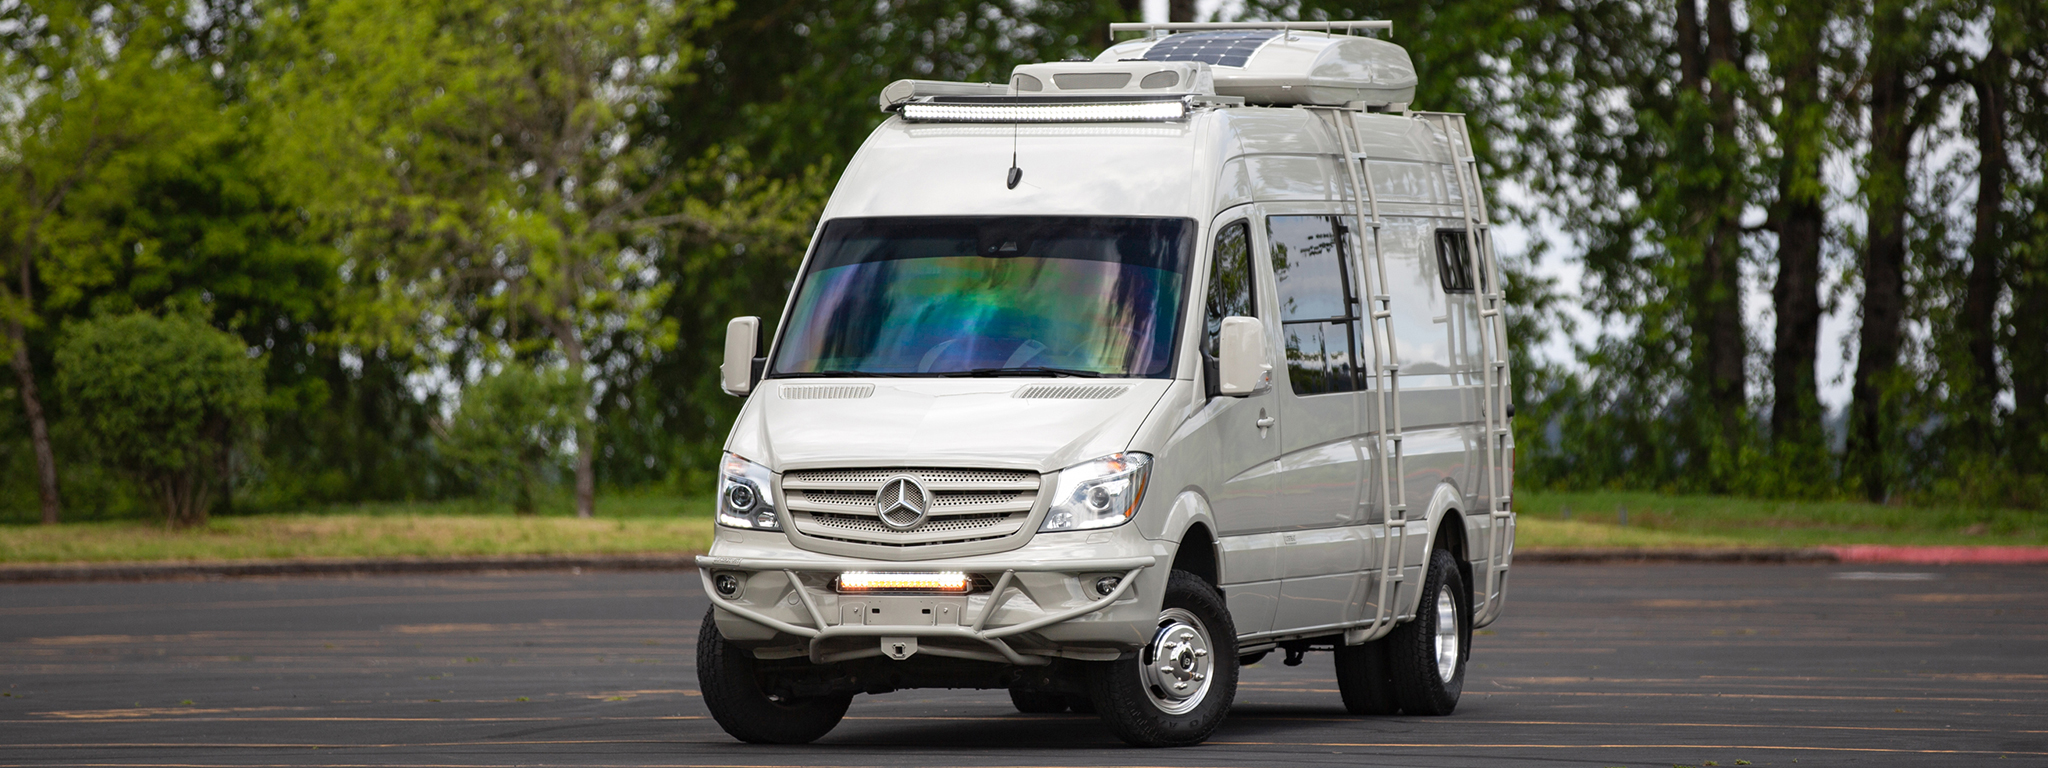 Fully color matched luxury van built to be off grid for extended times. Mercedes pebble grey sprinter 4wd that has a sporty exterior that is built with all the comforts of home.